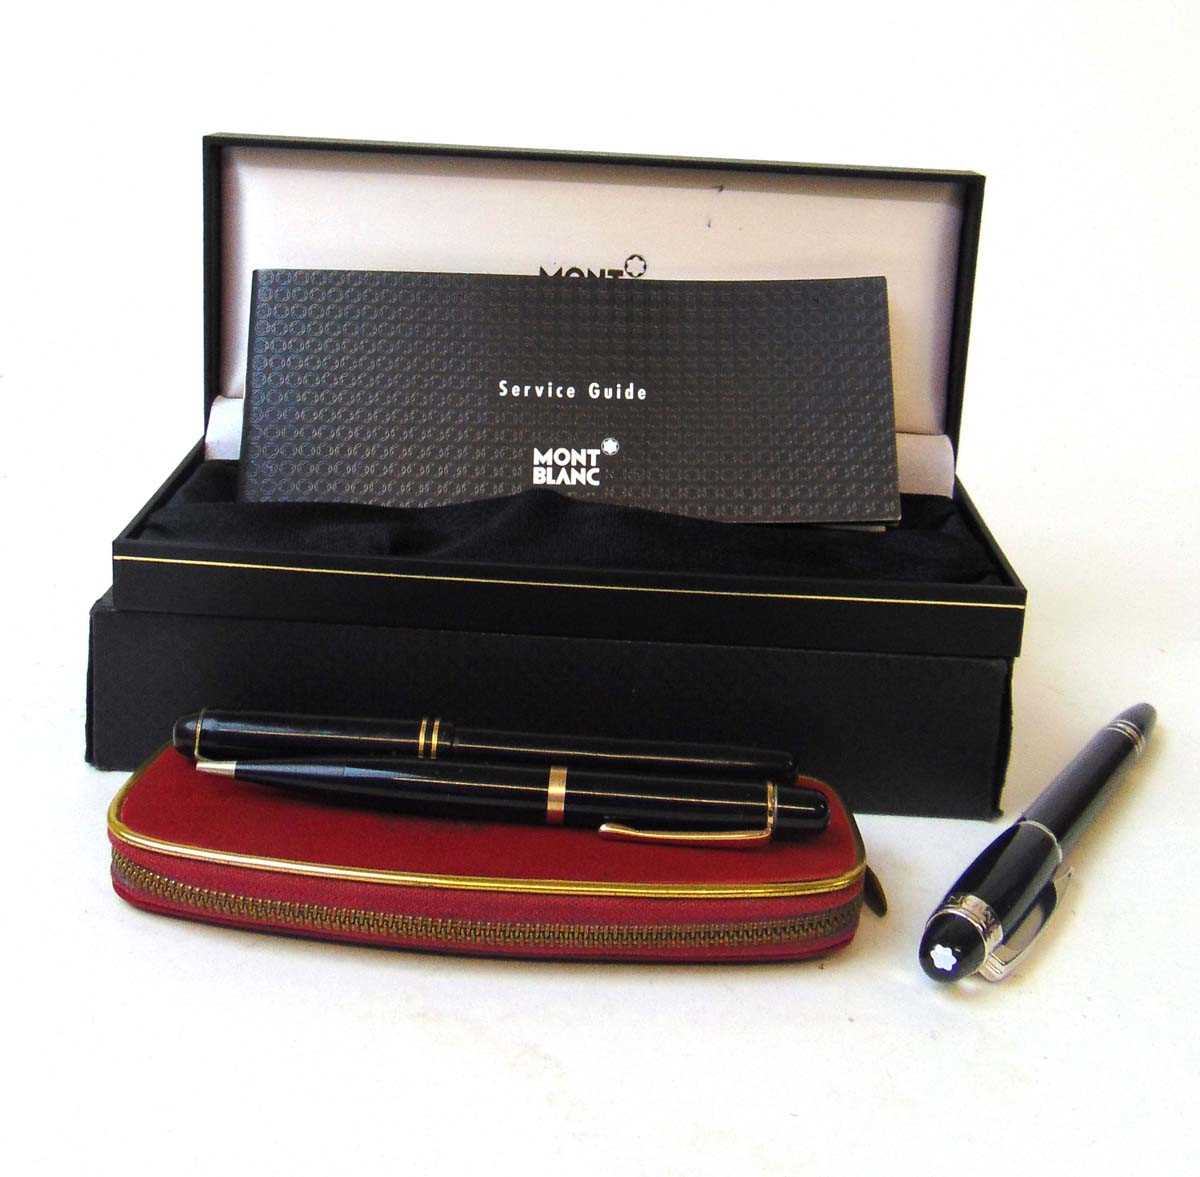 A Mont Blanc Starwalker rollerball pen, with black resin body, with presentation box and service